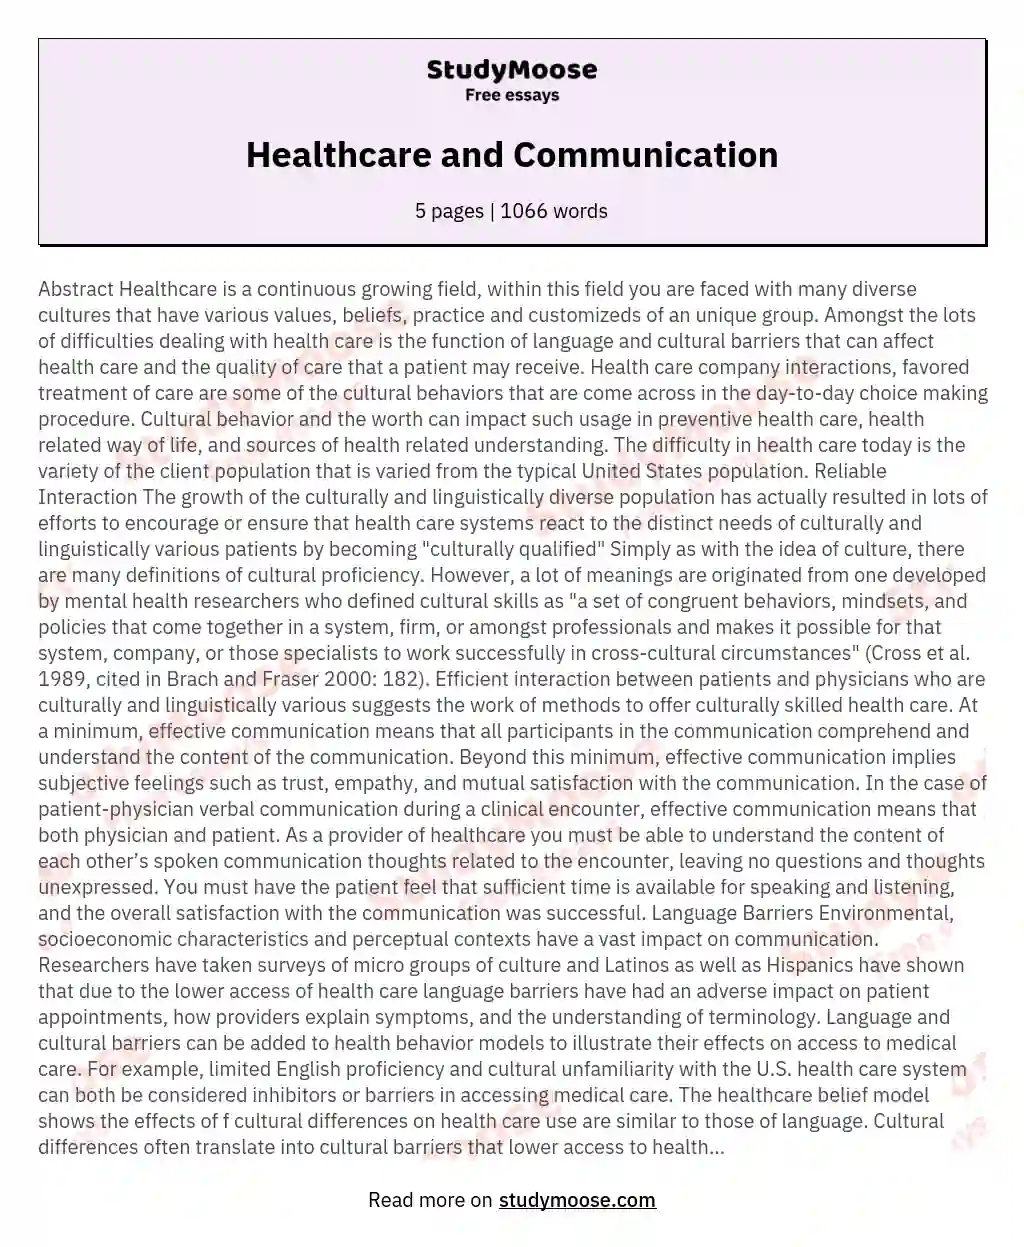 Healthcare and Communication essay